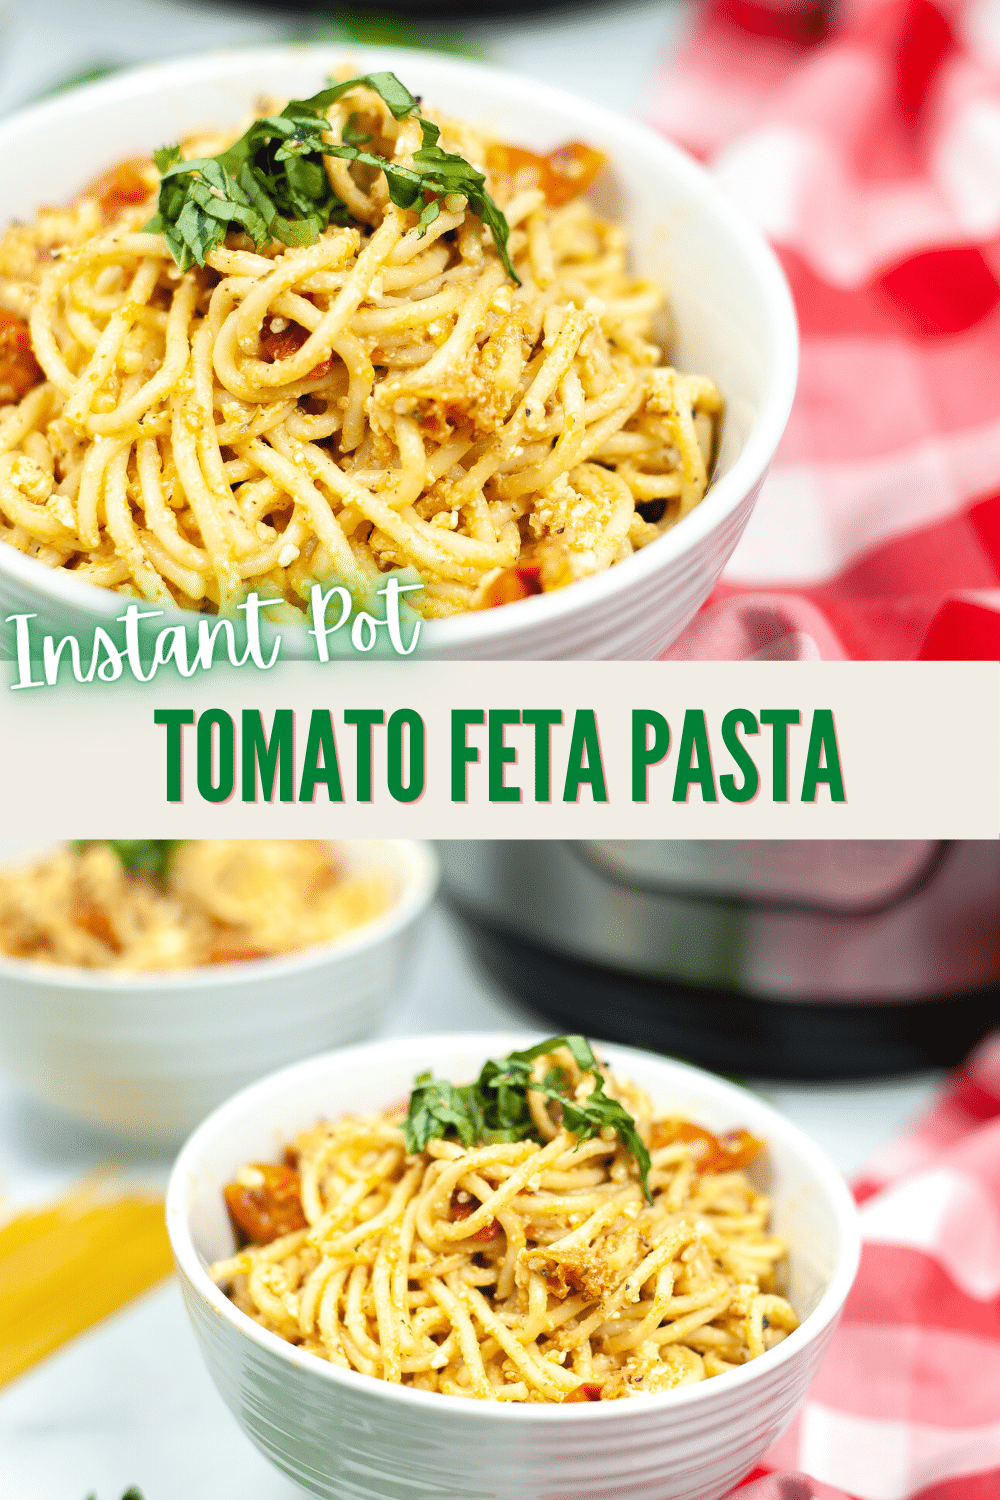 This Instant Pot Tomato Feta Pasta is one of my favorite pasta recipes to cook in the Instant Pot. With a cook time of 30 minutes, it's fast! #instantpot #pressurecooker #pasta #tomatofetapasta via @wondermomwannab